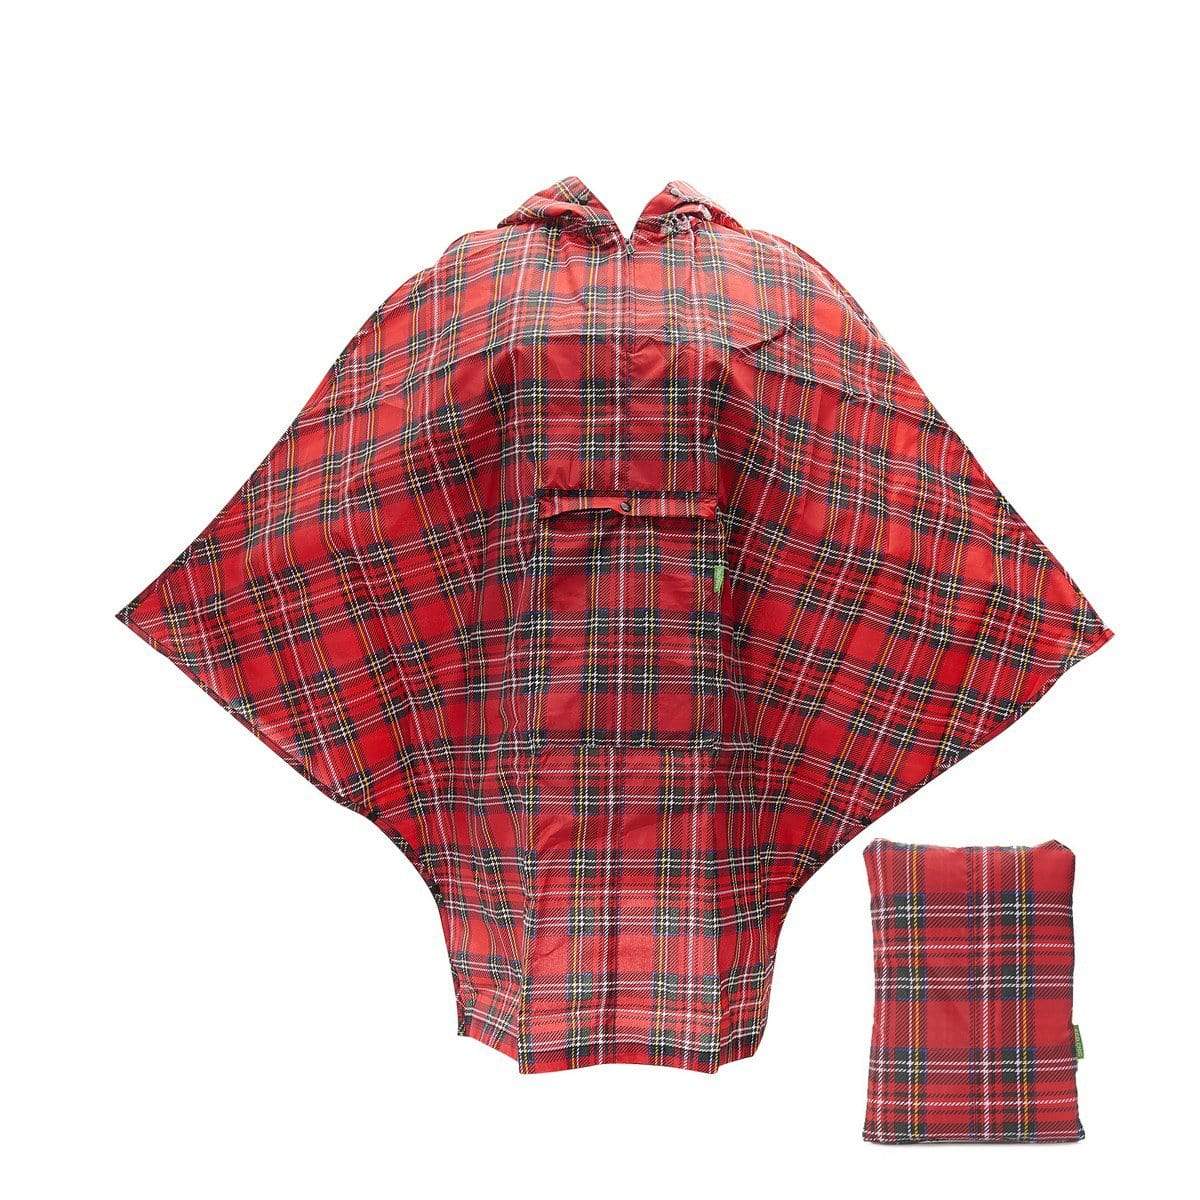 Eco Chic Red Tartan Waterproof Foldable Adult Poncho